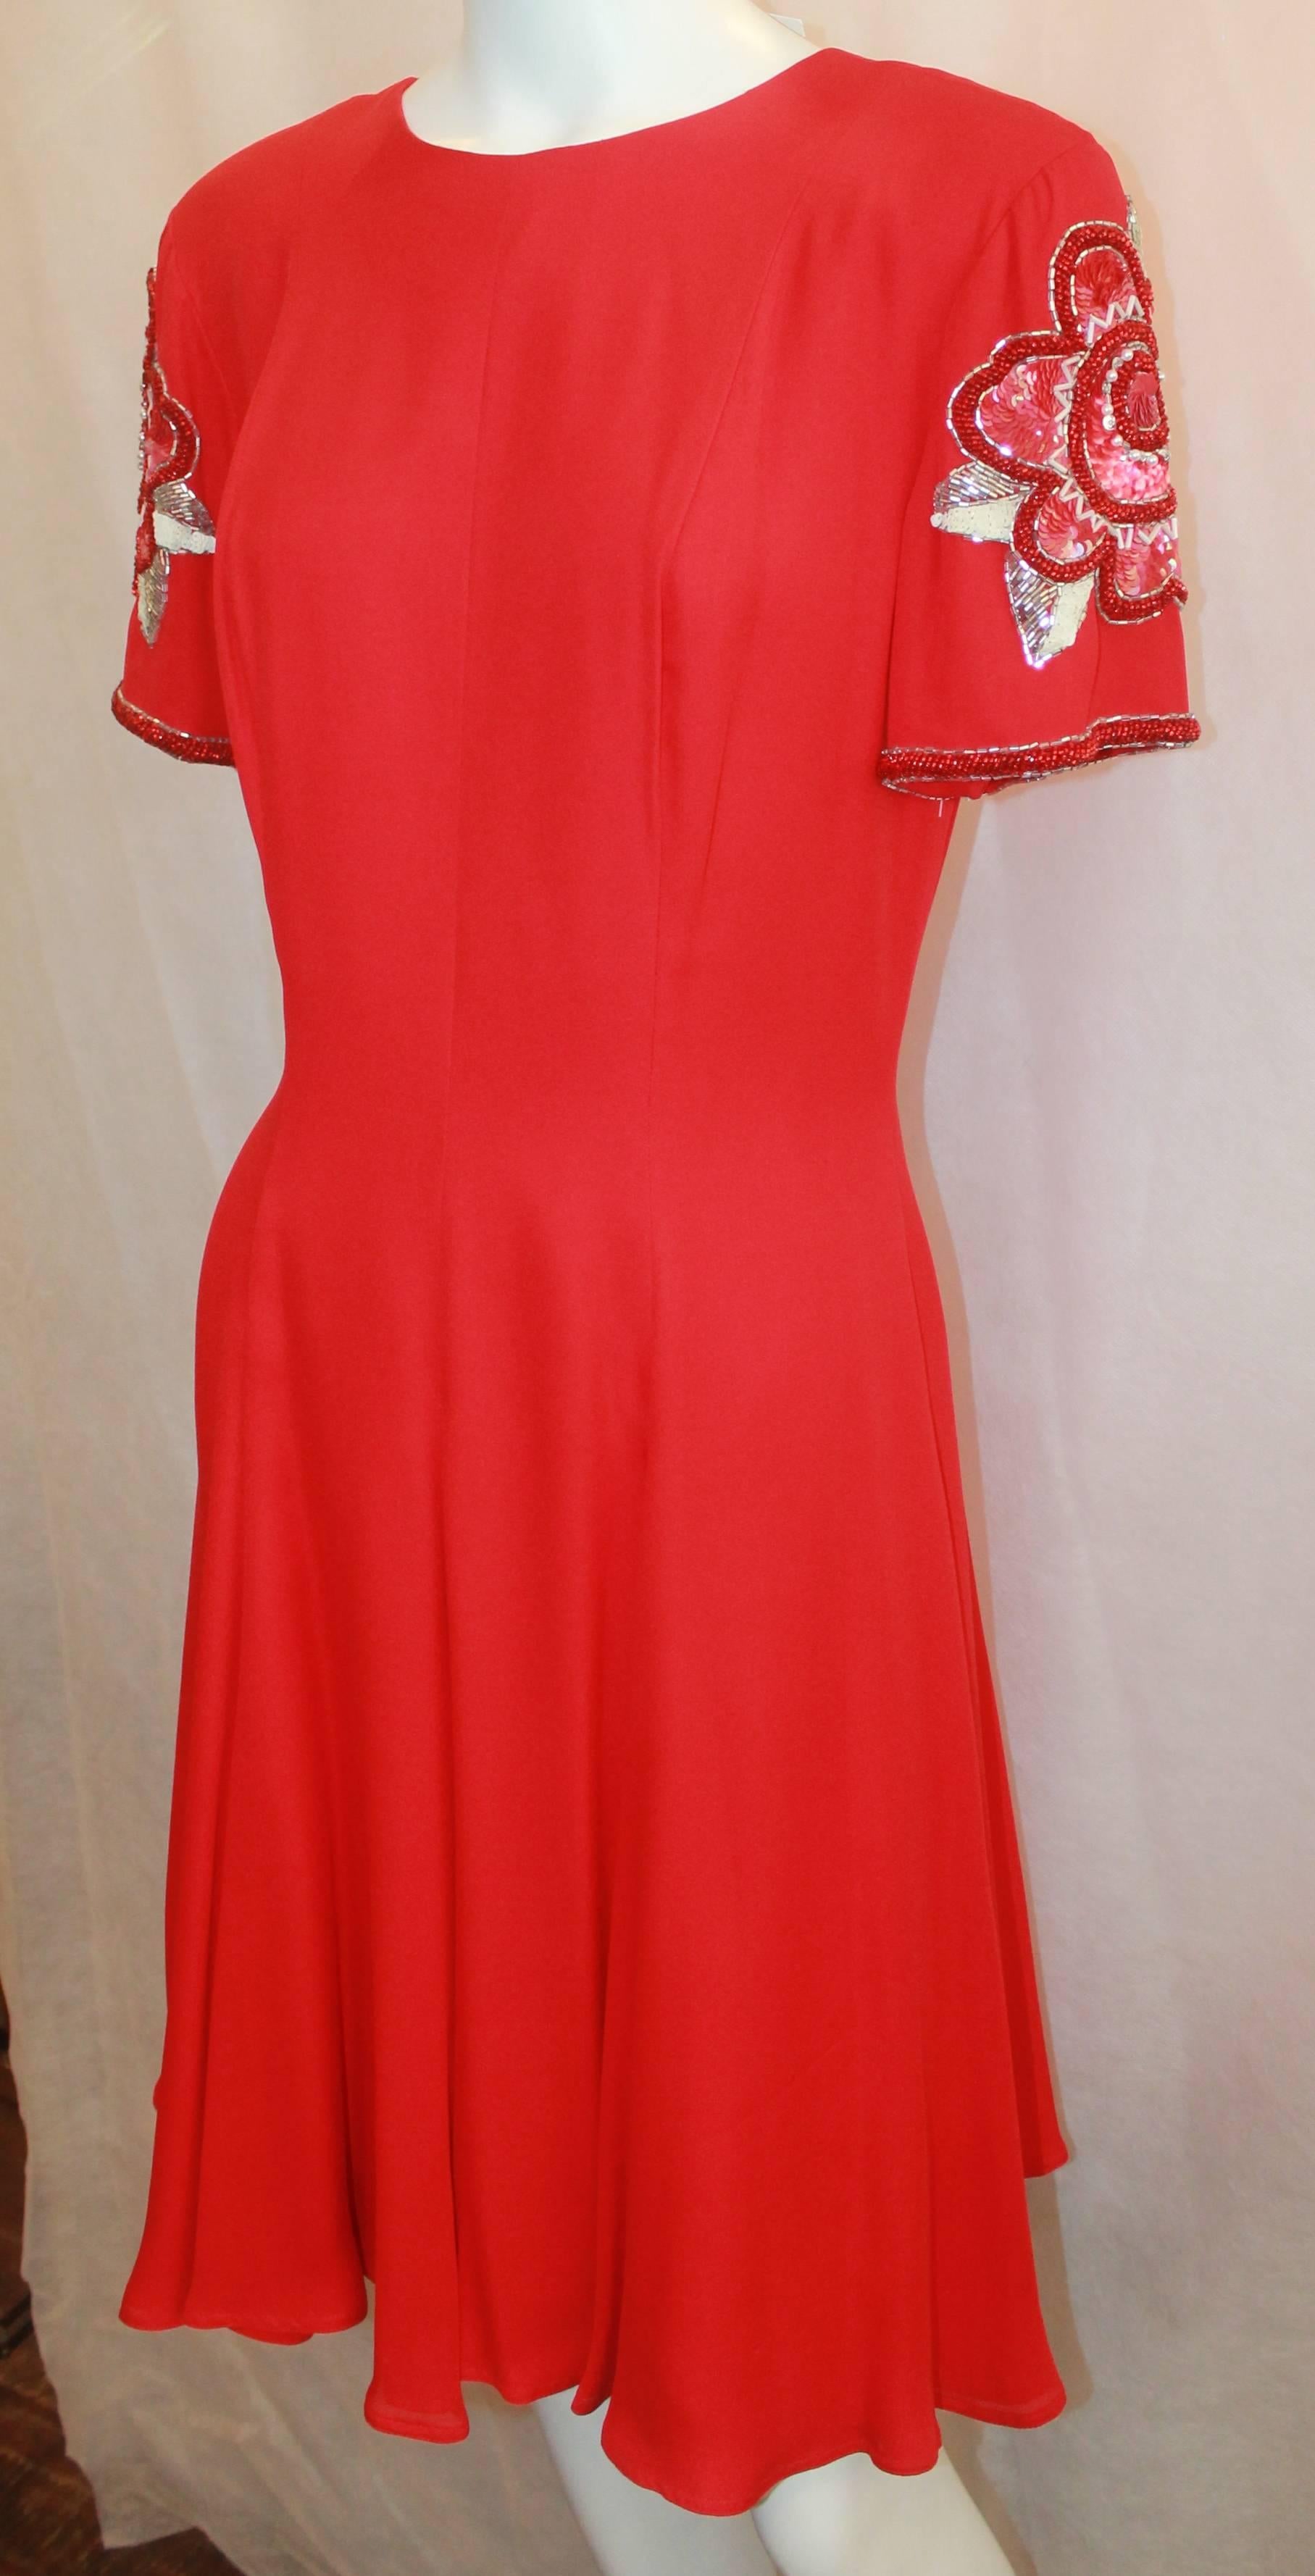 Bob Mackie Red Silk Short Sleeve Dress with Floral Beading - 6. This dress is in excellent condition and features a round neckline, pleats at the bottom, an intricate floral design on the shoulders, and a back zipper. 

Measurements:
Bust-